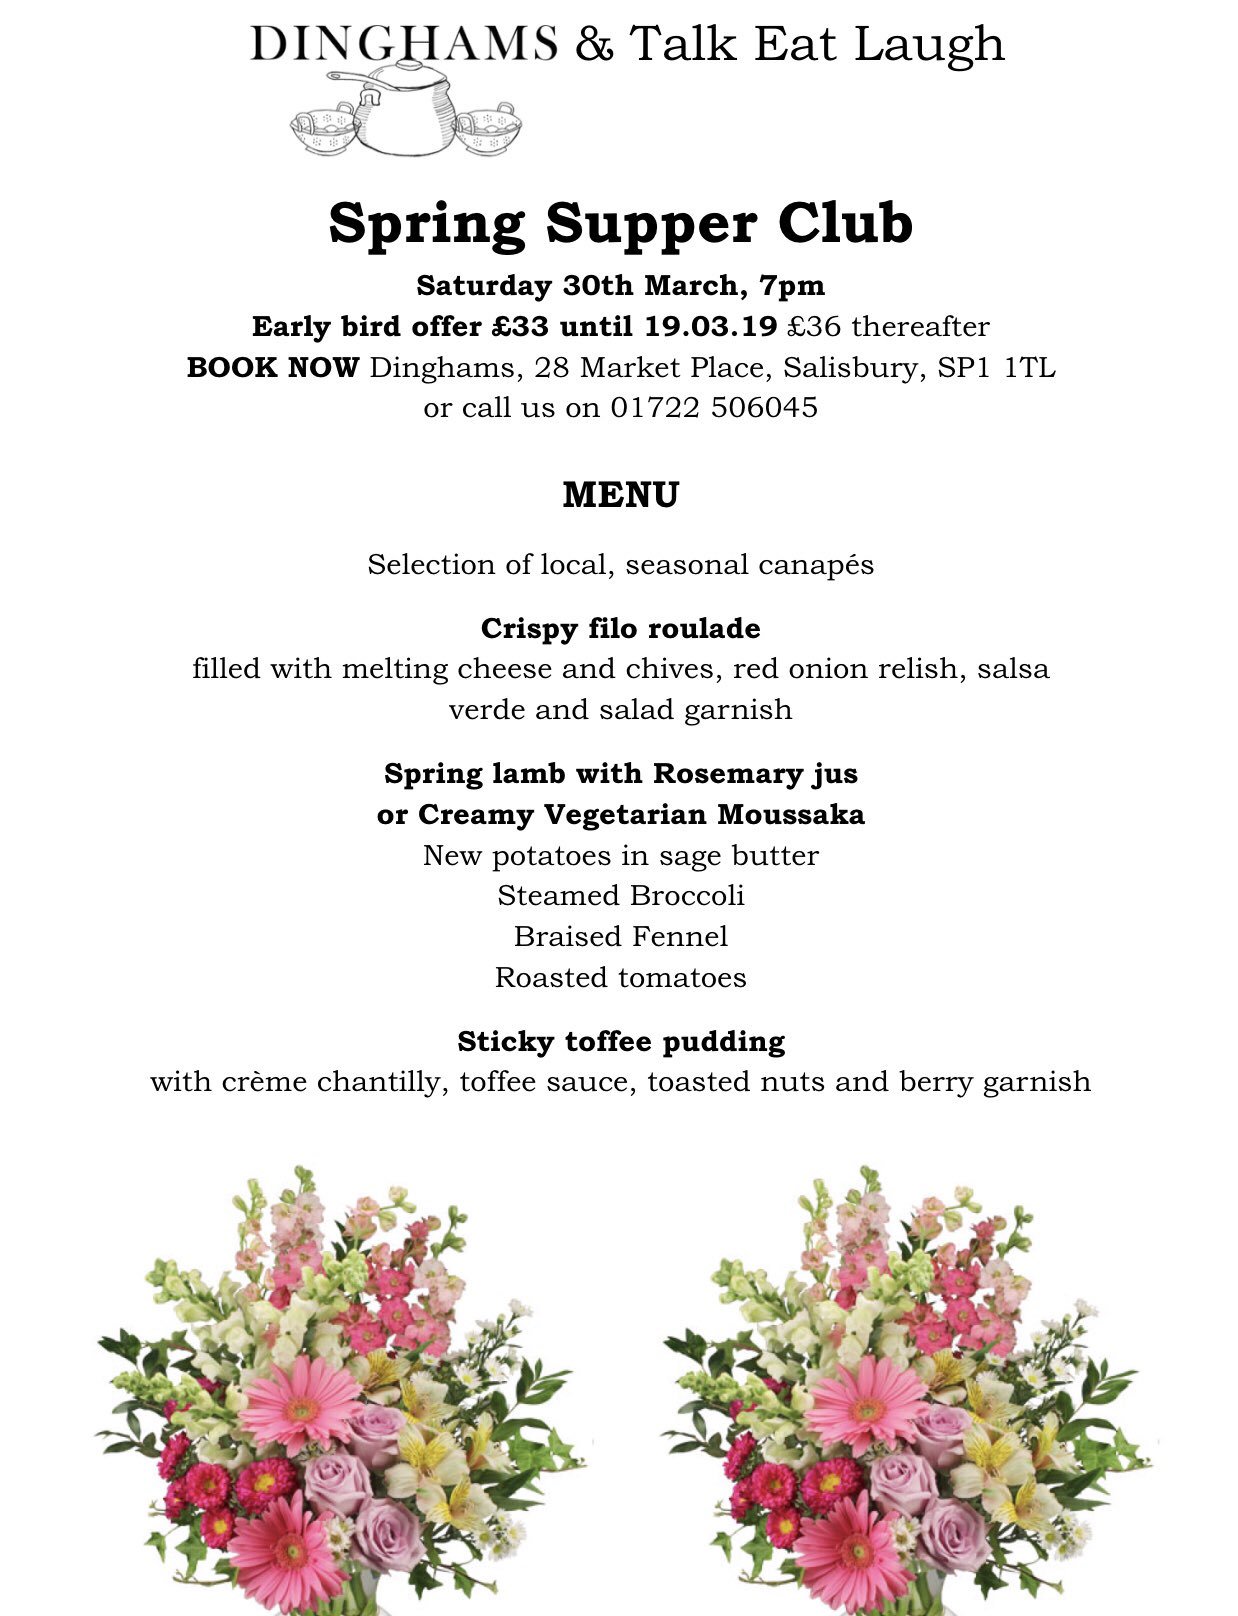 Supper Club with Dinghams, 30th March